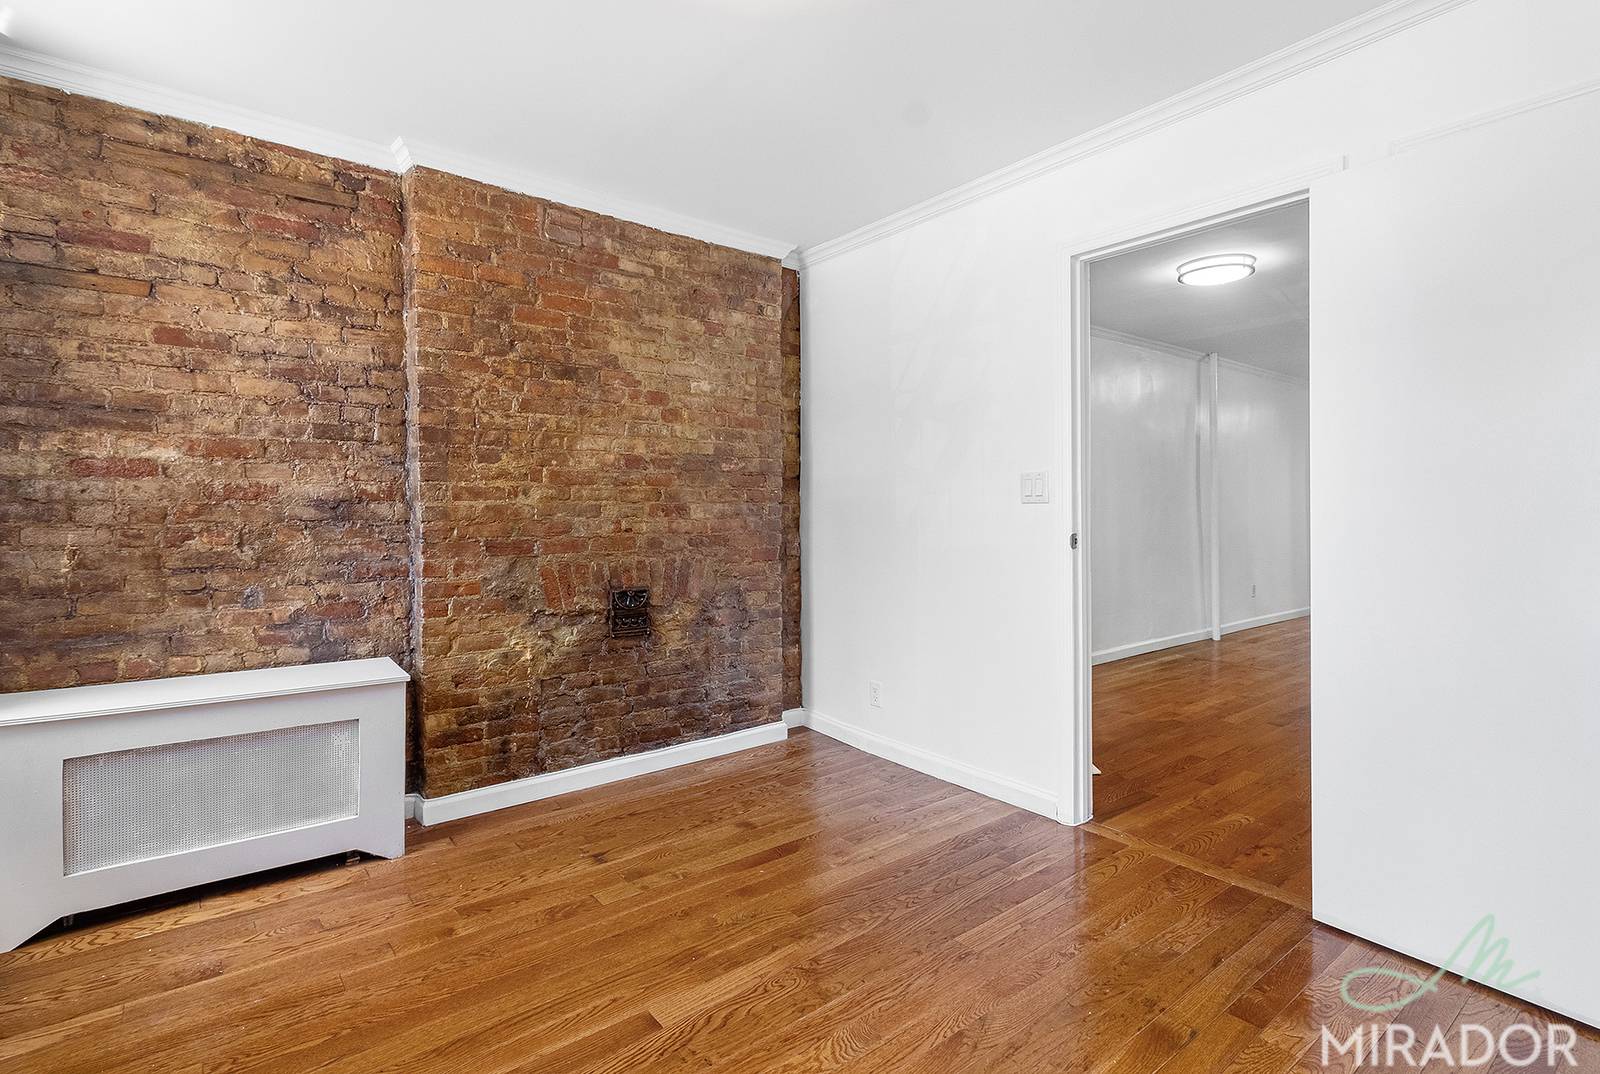 OVERSIZED NO FEE one bedroom apartment nestled in the heart of Midtown West.